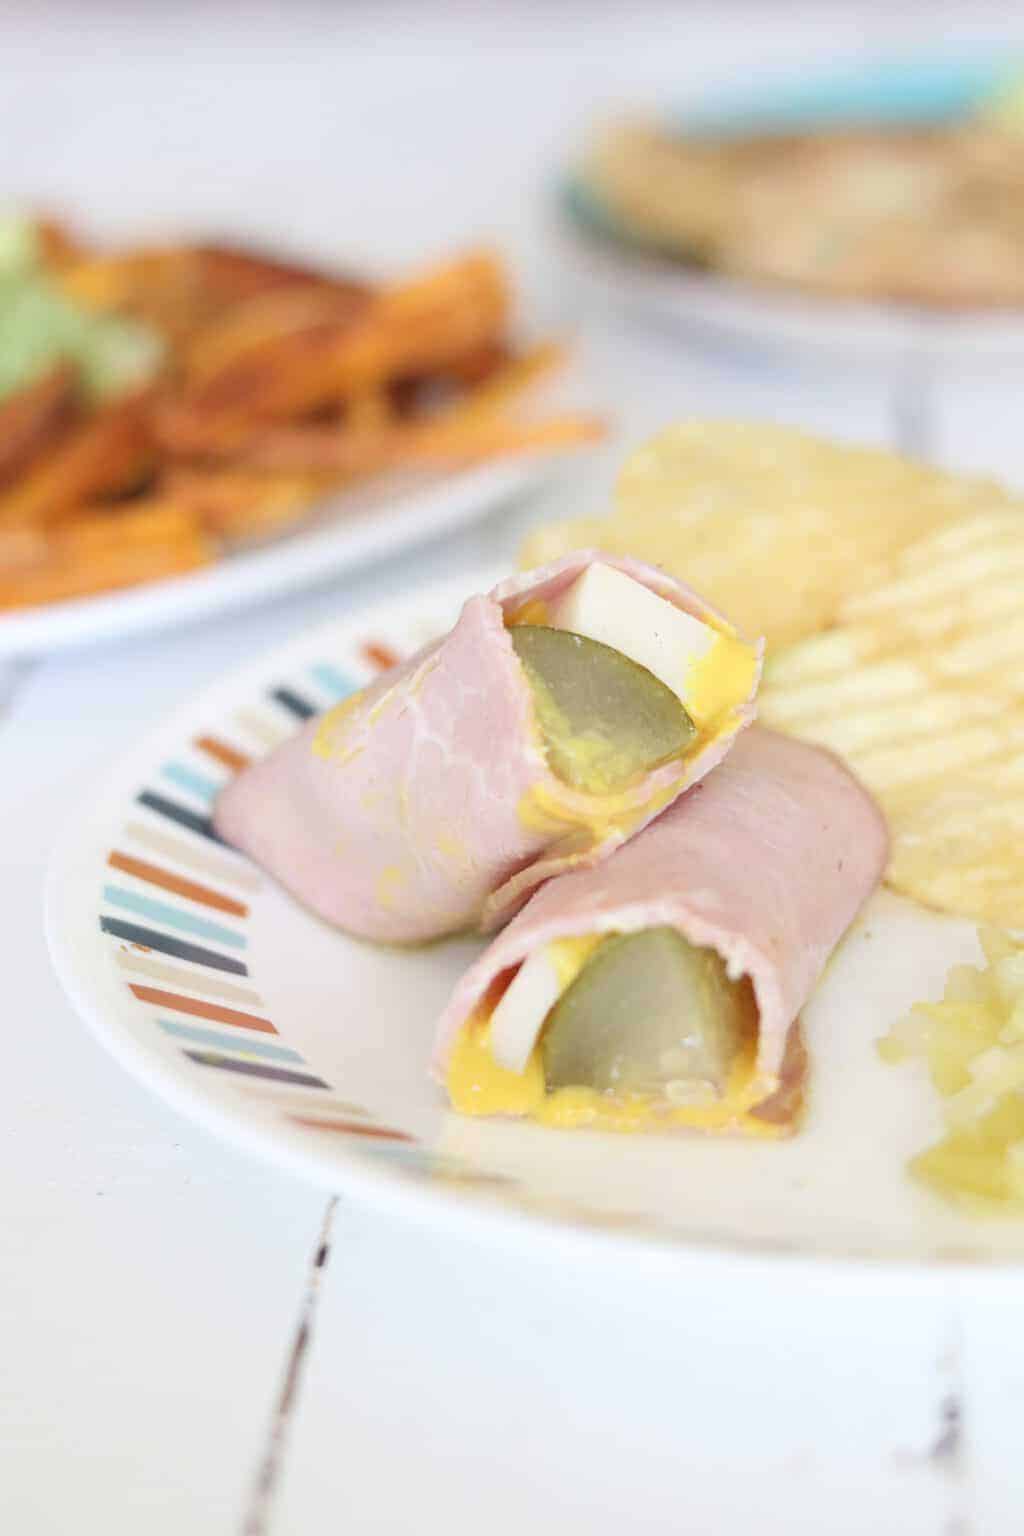 Ham roll up with chips on plate sitting on wooden table.